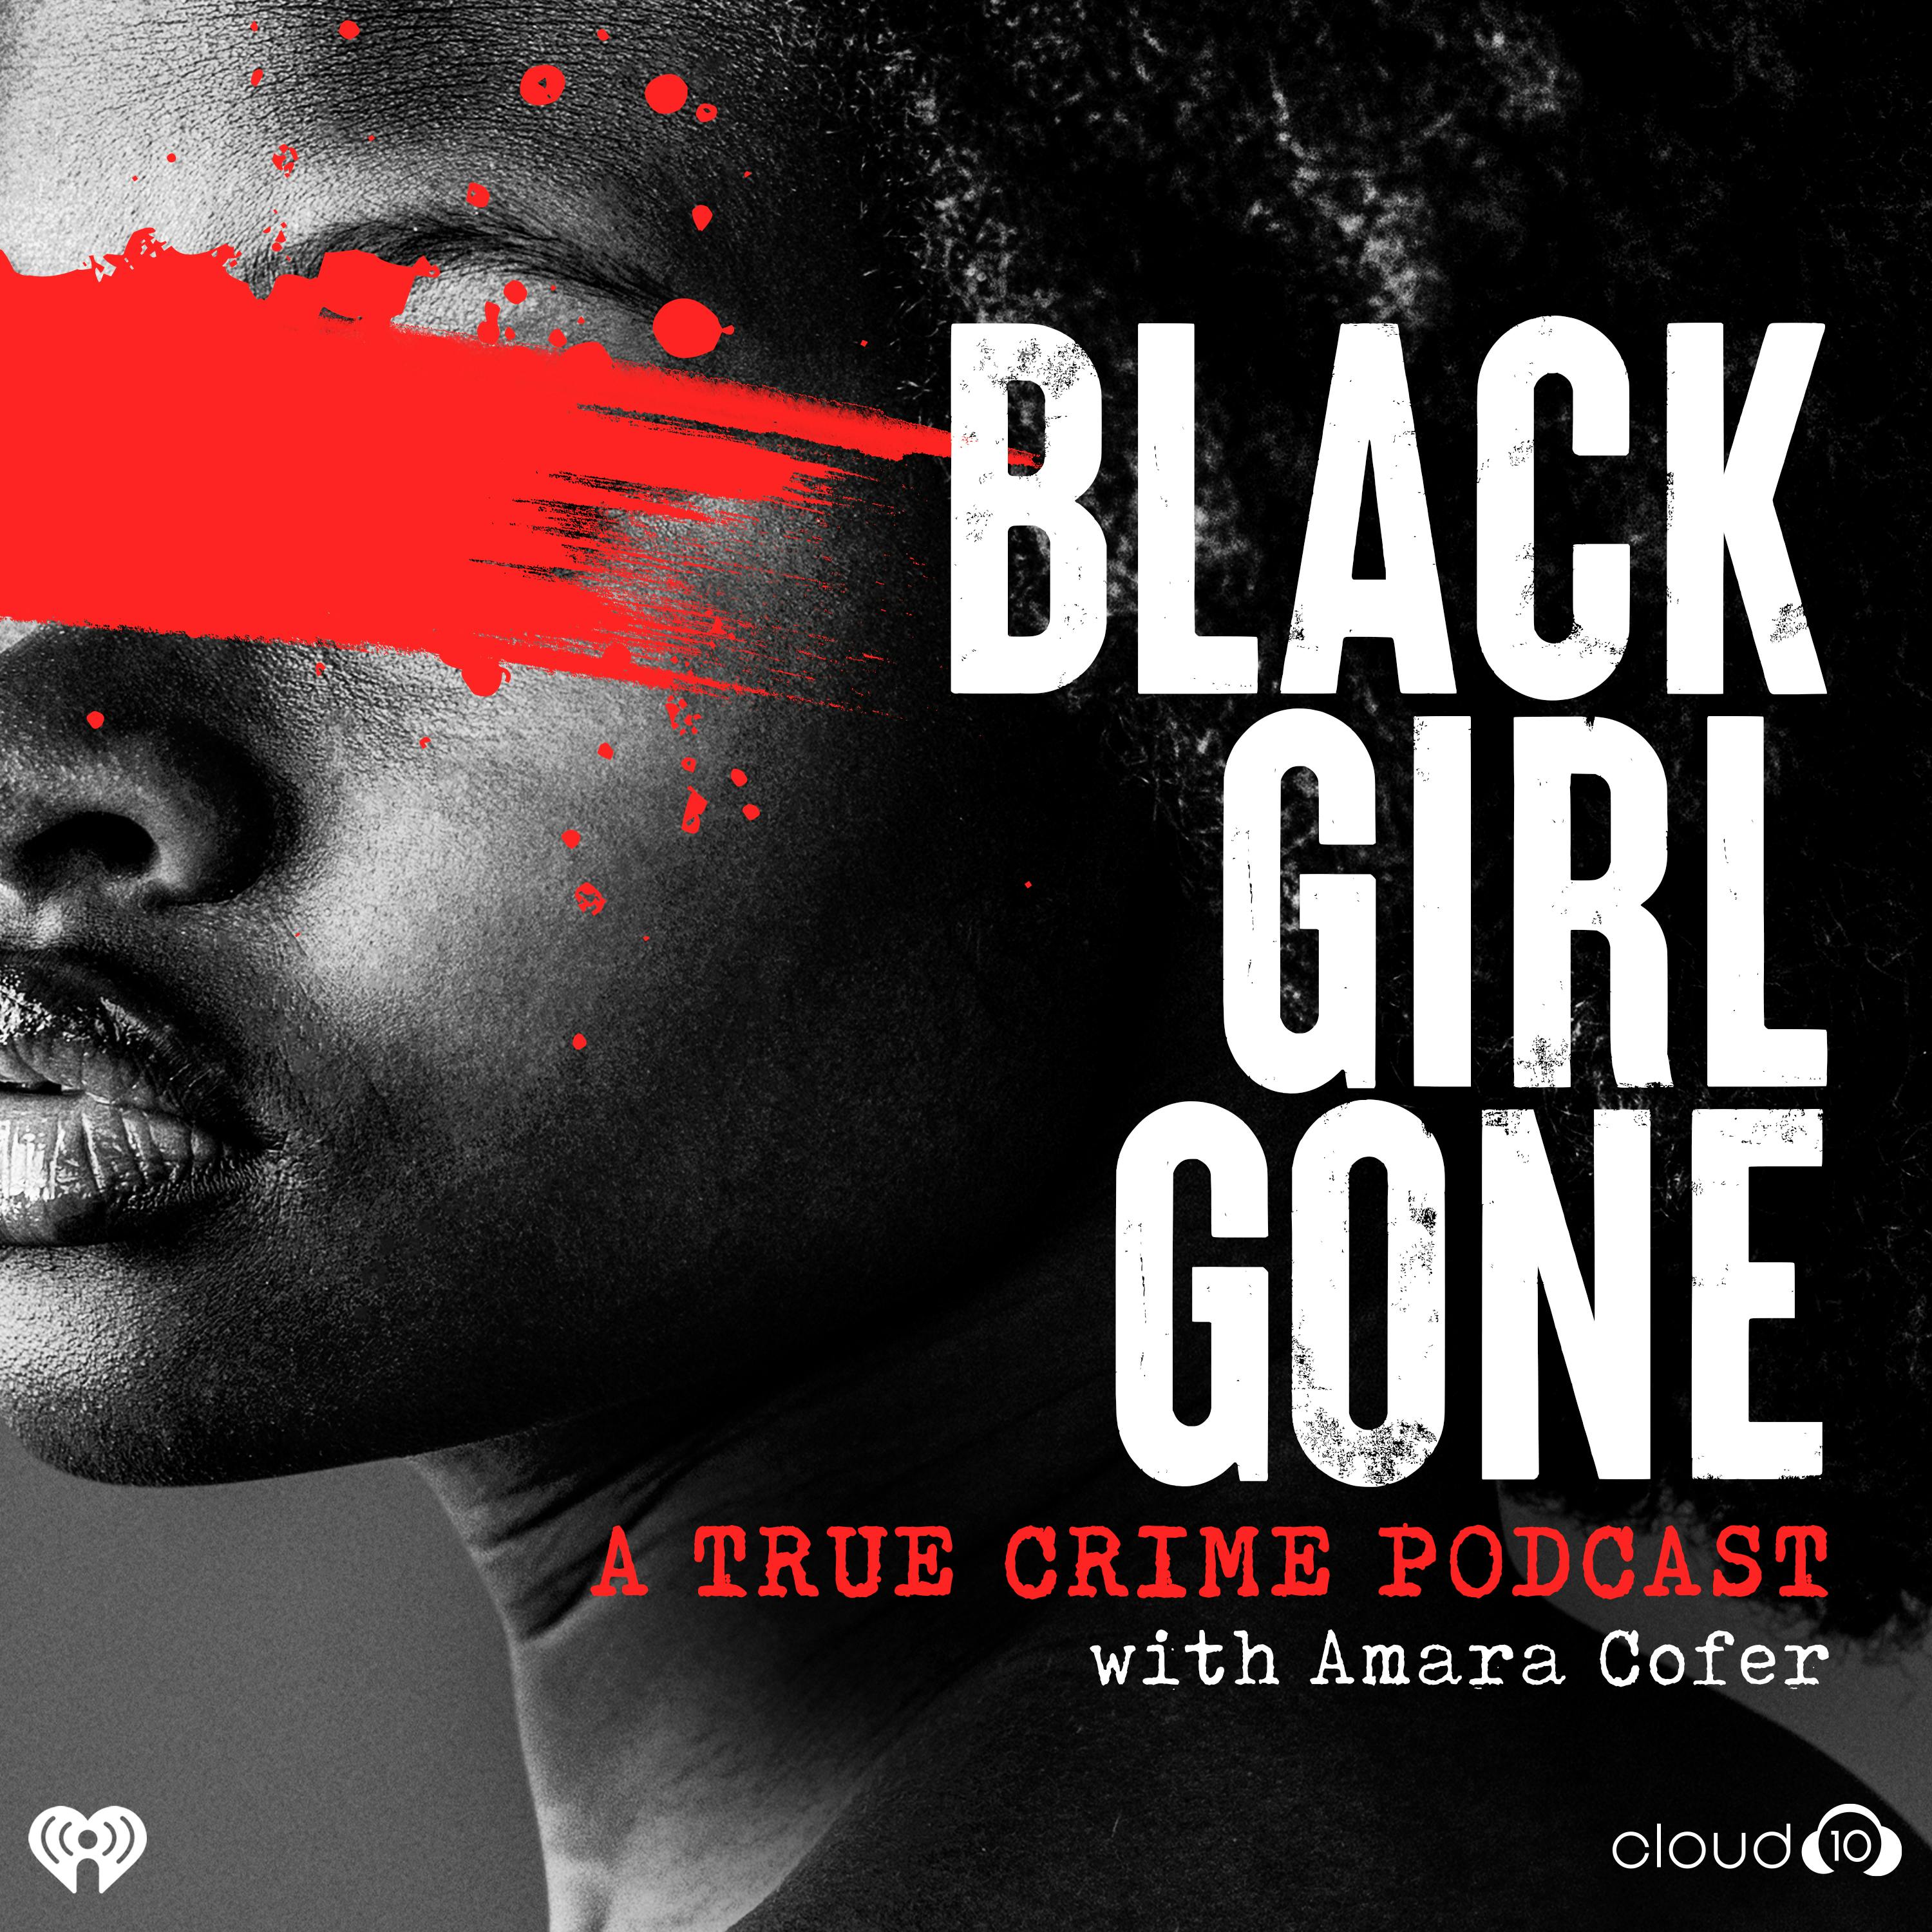 Black Girl Gone: A True Crime Podcast:Cloud10 and iHeartPodcasts